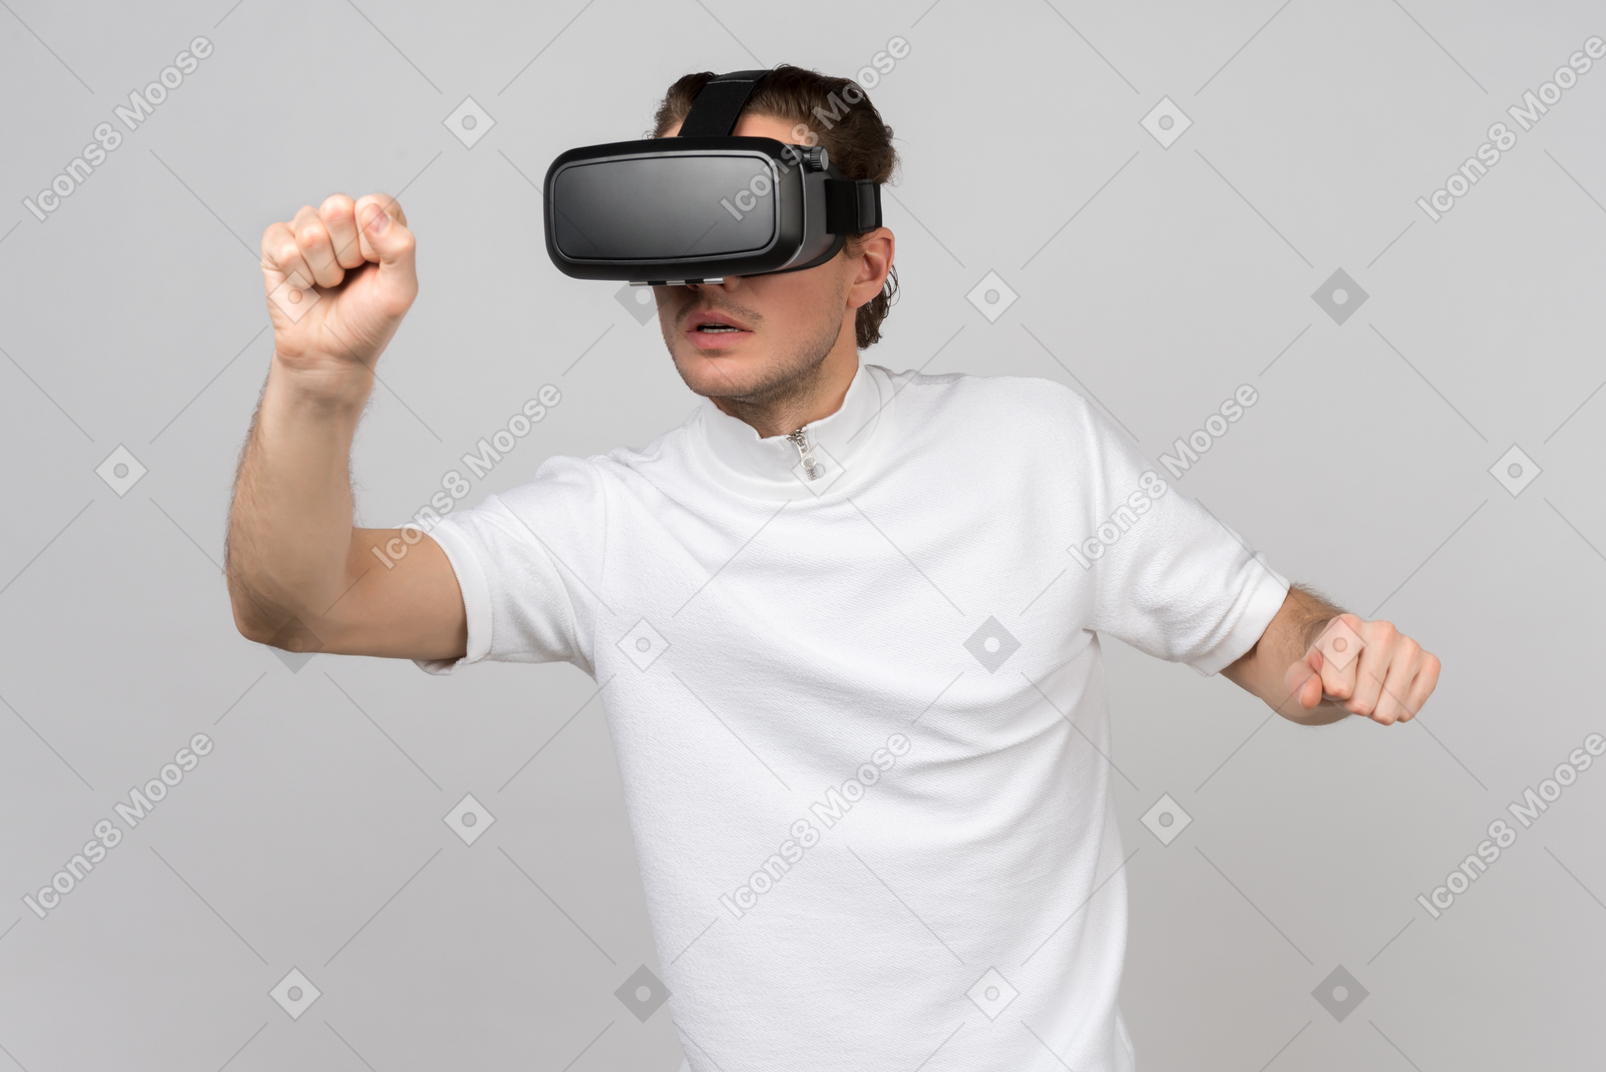 Man in virtual reality headset playing fighting game